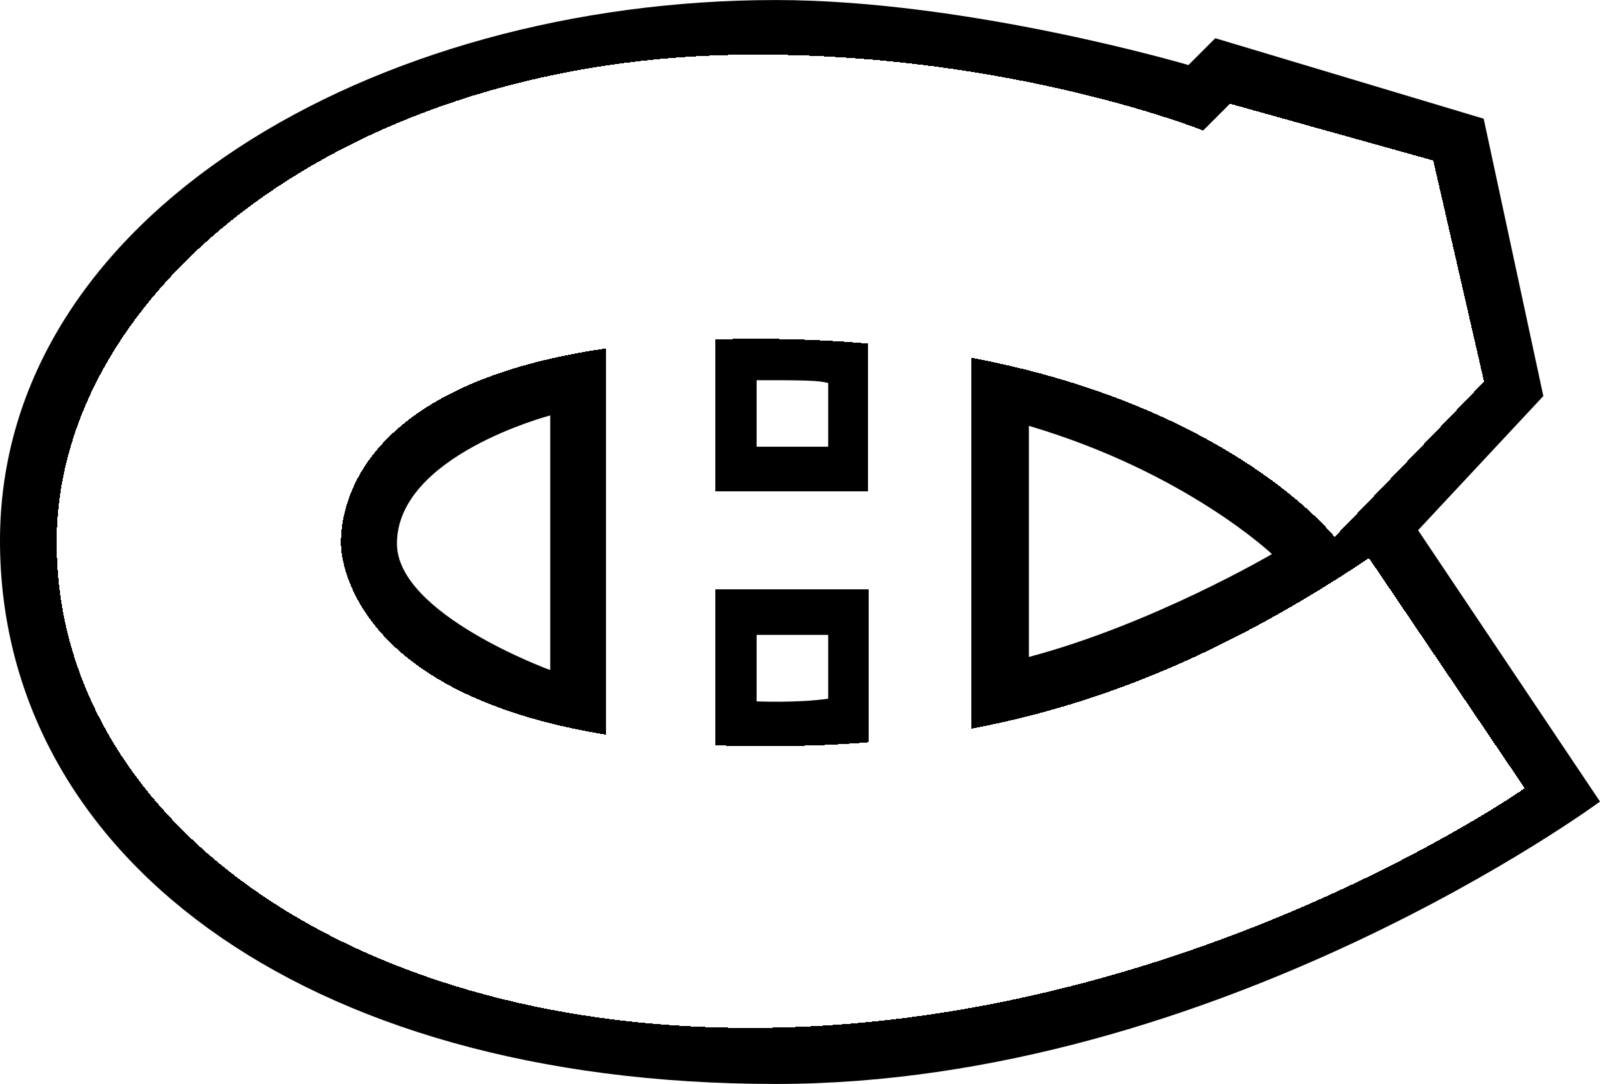 Montreal Canadiens logo and symbol